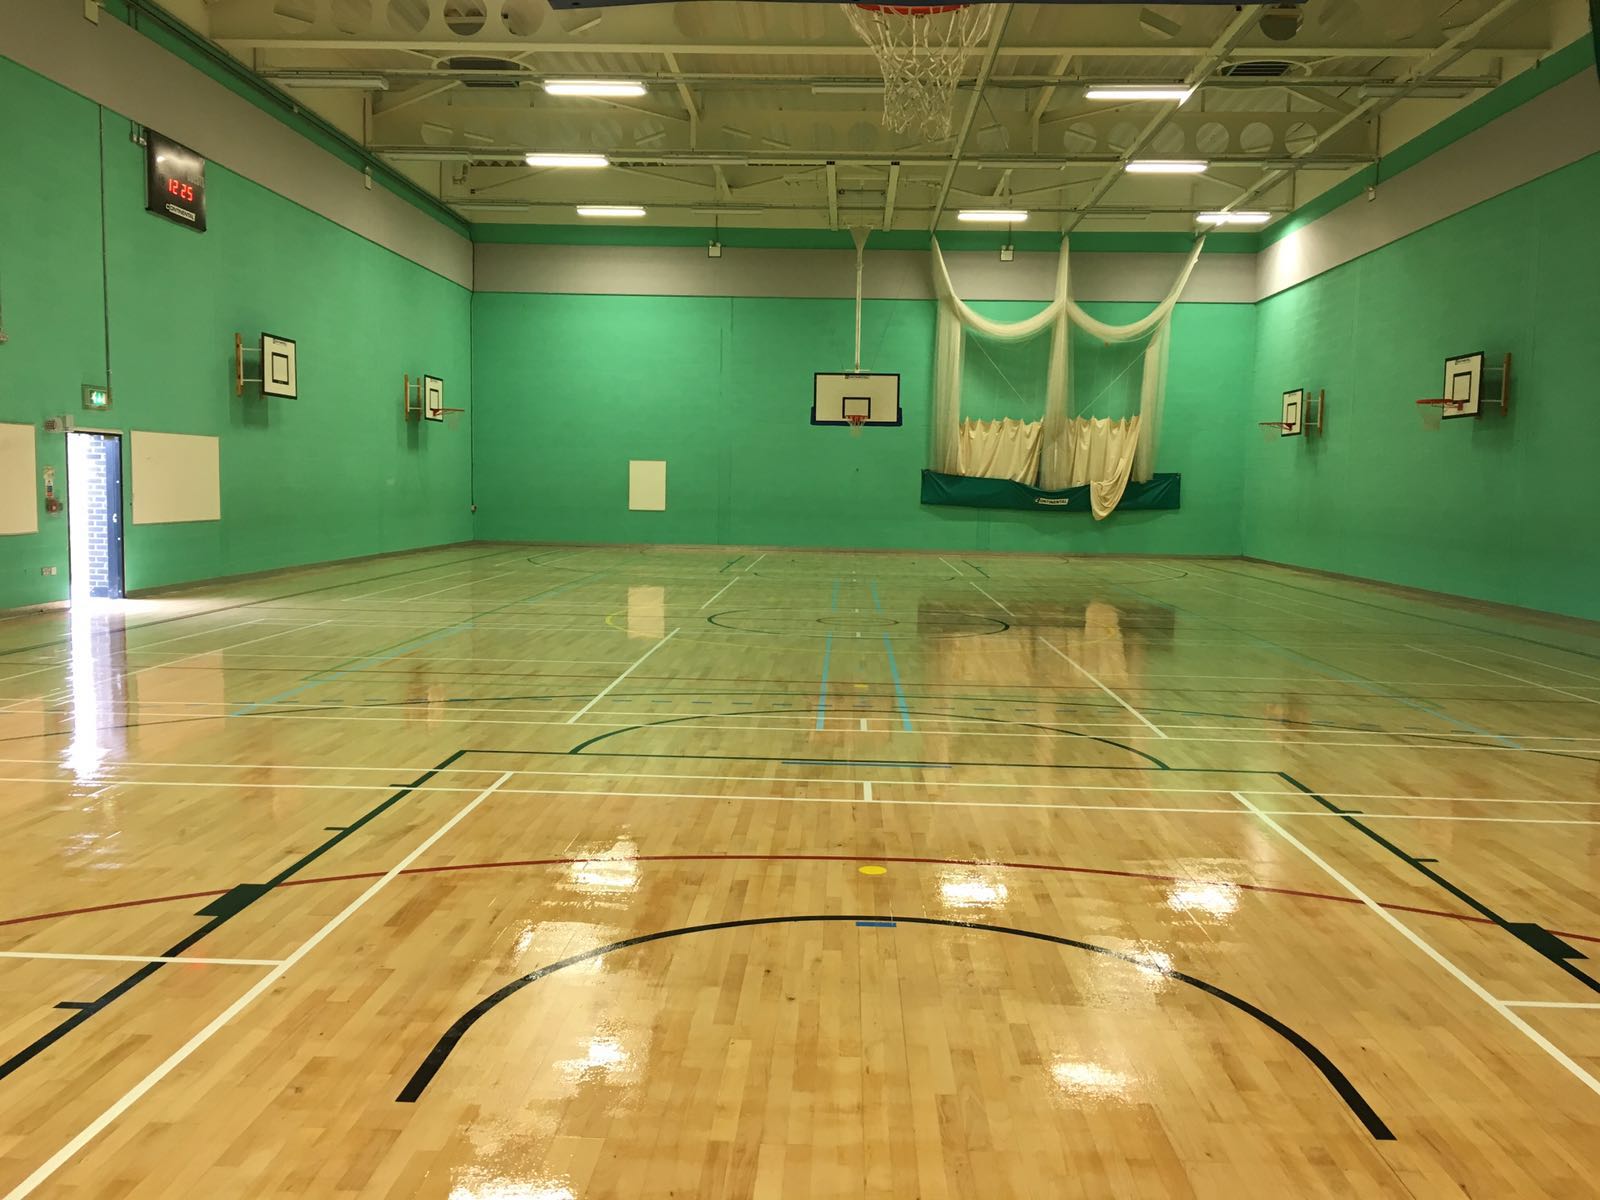 School Timber sports hall court refurbishment with court markings by Sports Surfaces UK